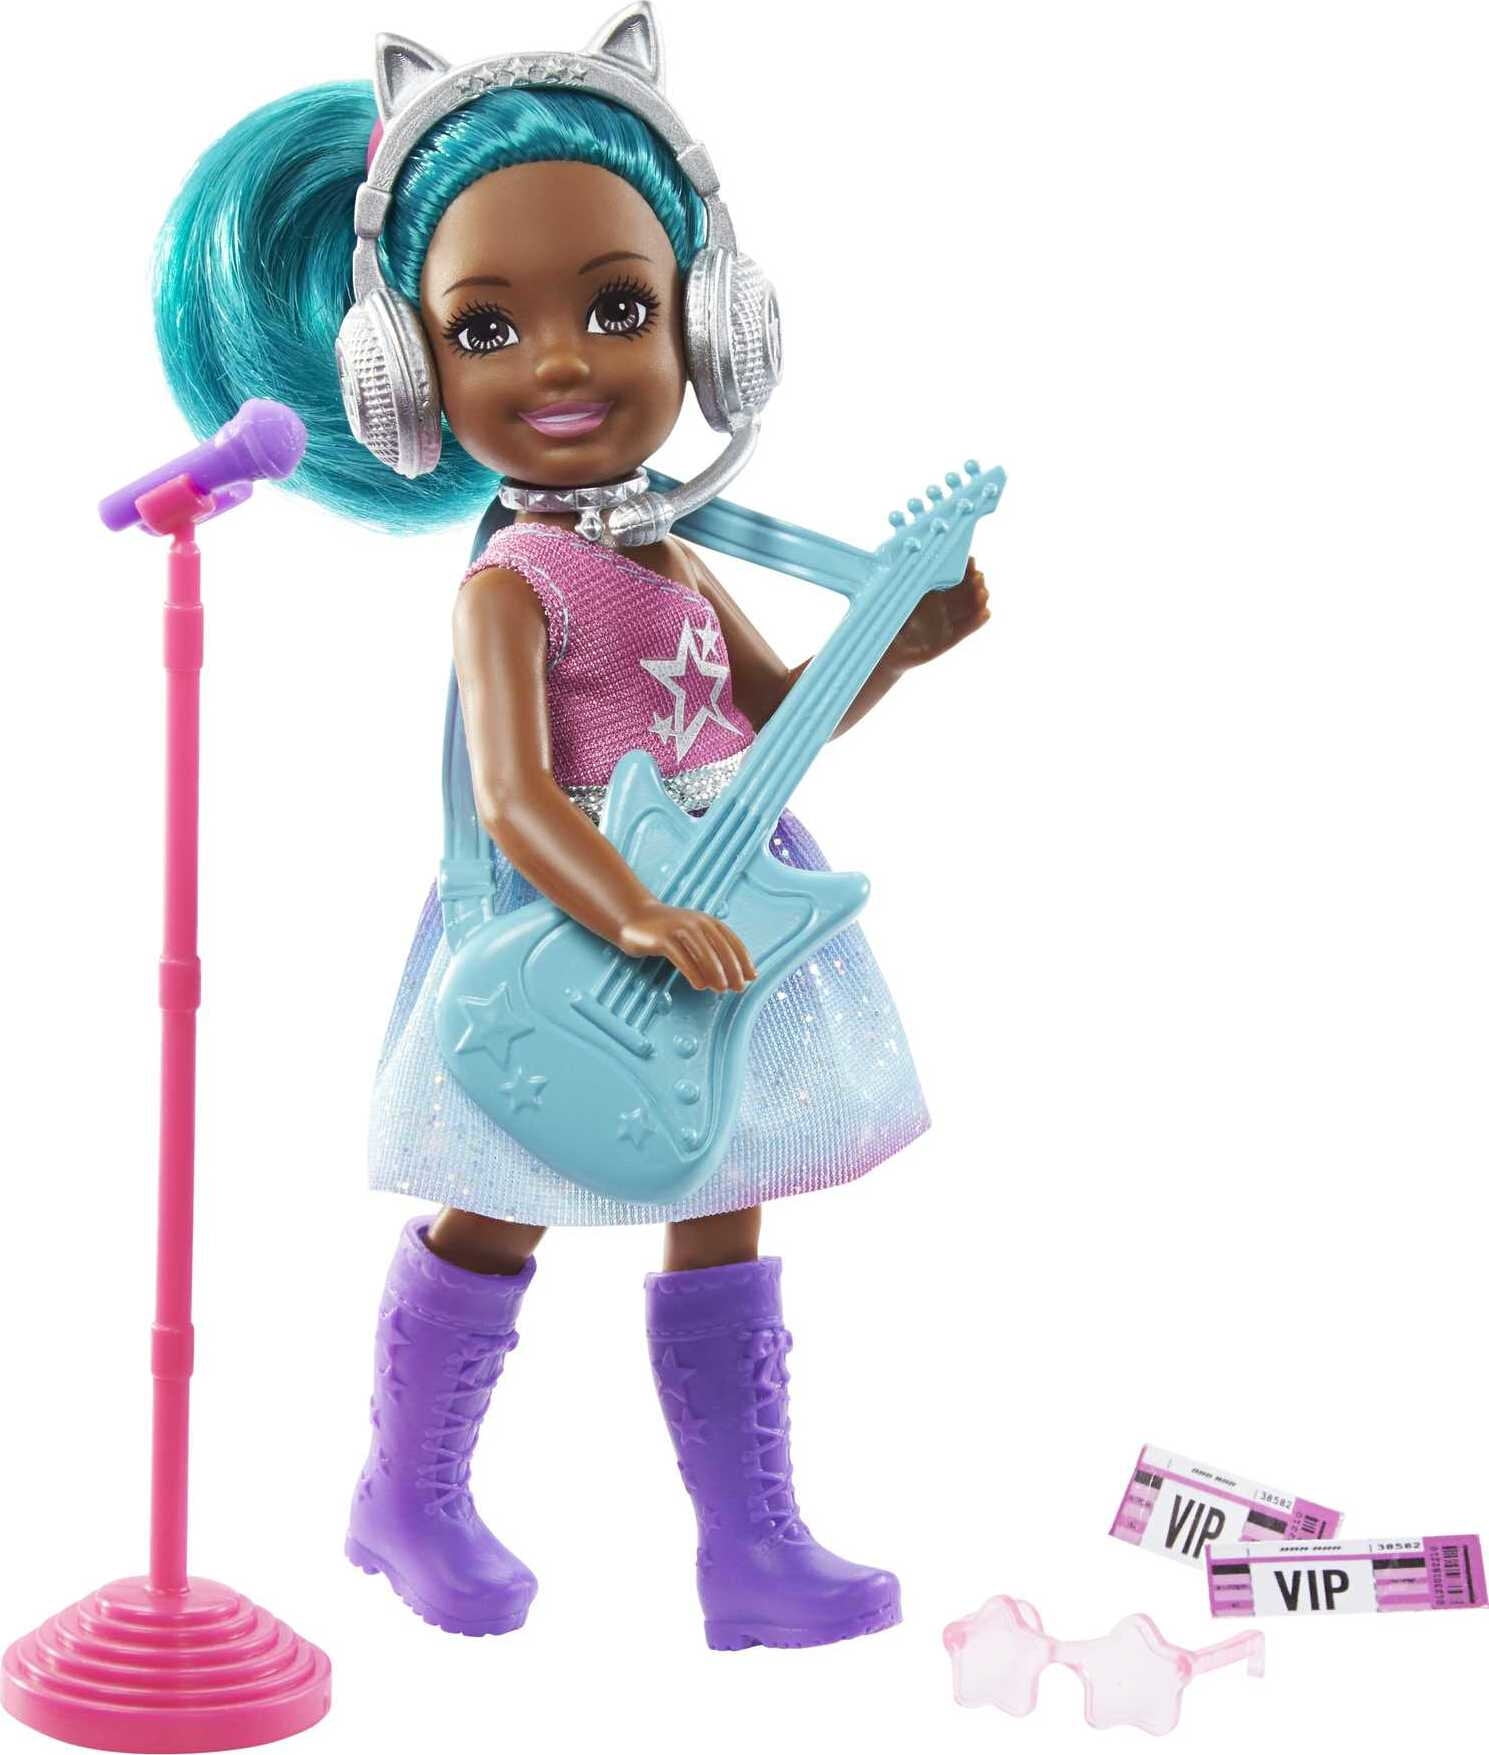 Barbie Chelsea Can Be Playset with Brunette Chelsea Rockstar Doll (6-in/15.24-cm), Guitar, Microphone, Headphones, 2 VIP Tickets, Star-shaped Glasses, Great Gift for Ages 3 Years Old & Up